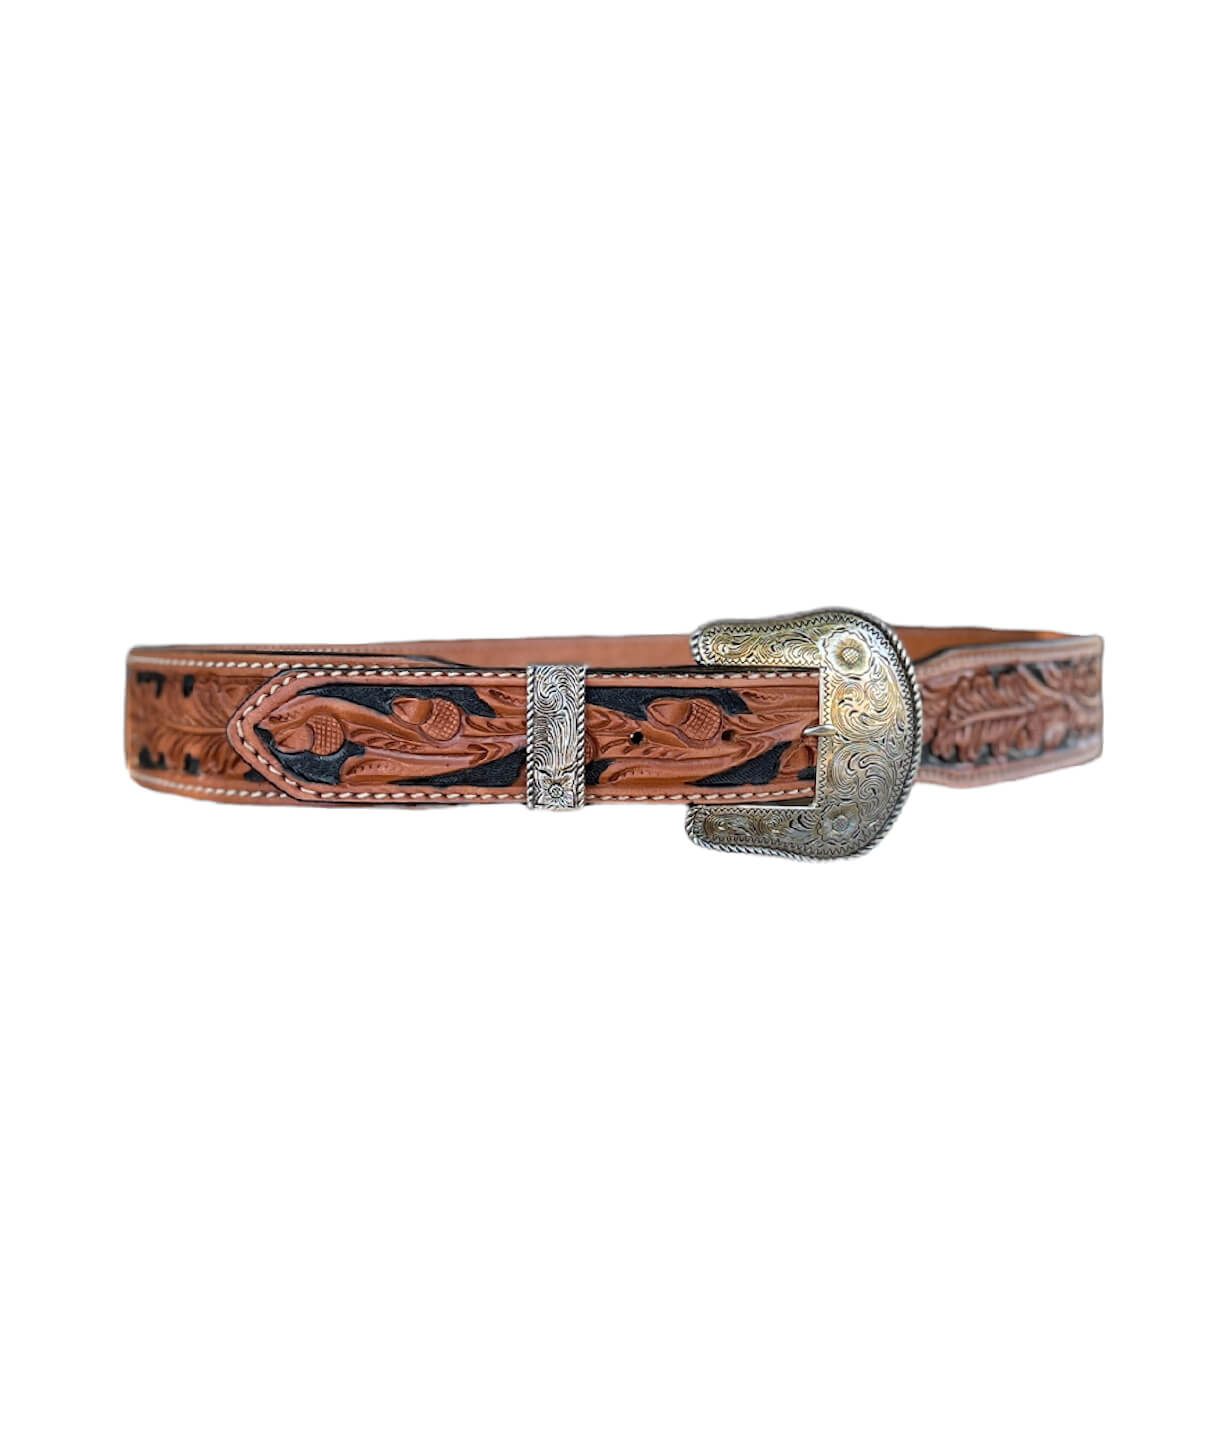 This is our TAPERED golden leather belt with black painted background and acorn tooling. It comes with a silver belt buckle and silver belt loop.  